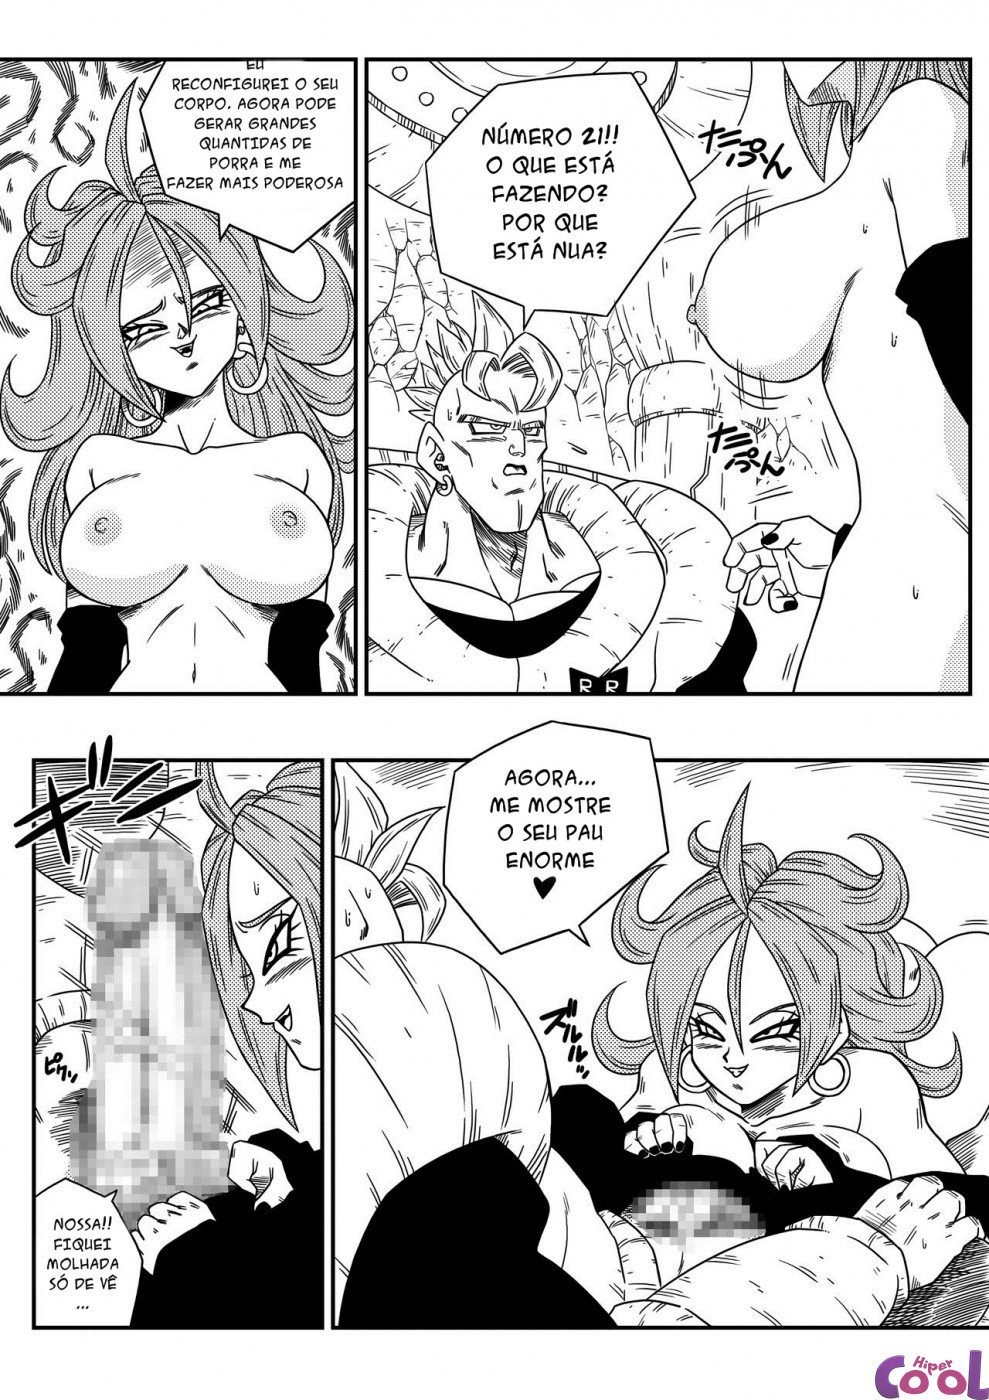 [Yamamoto] Kyonyuu Android Sekai Seiha o Netsubou!! Android 21 Shutsugen!! | Busty Android Wants to Dominate the World! (Dragon Ball FighterZ) [Portuguese-BR] {Hiper.cooL} 